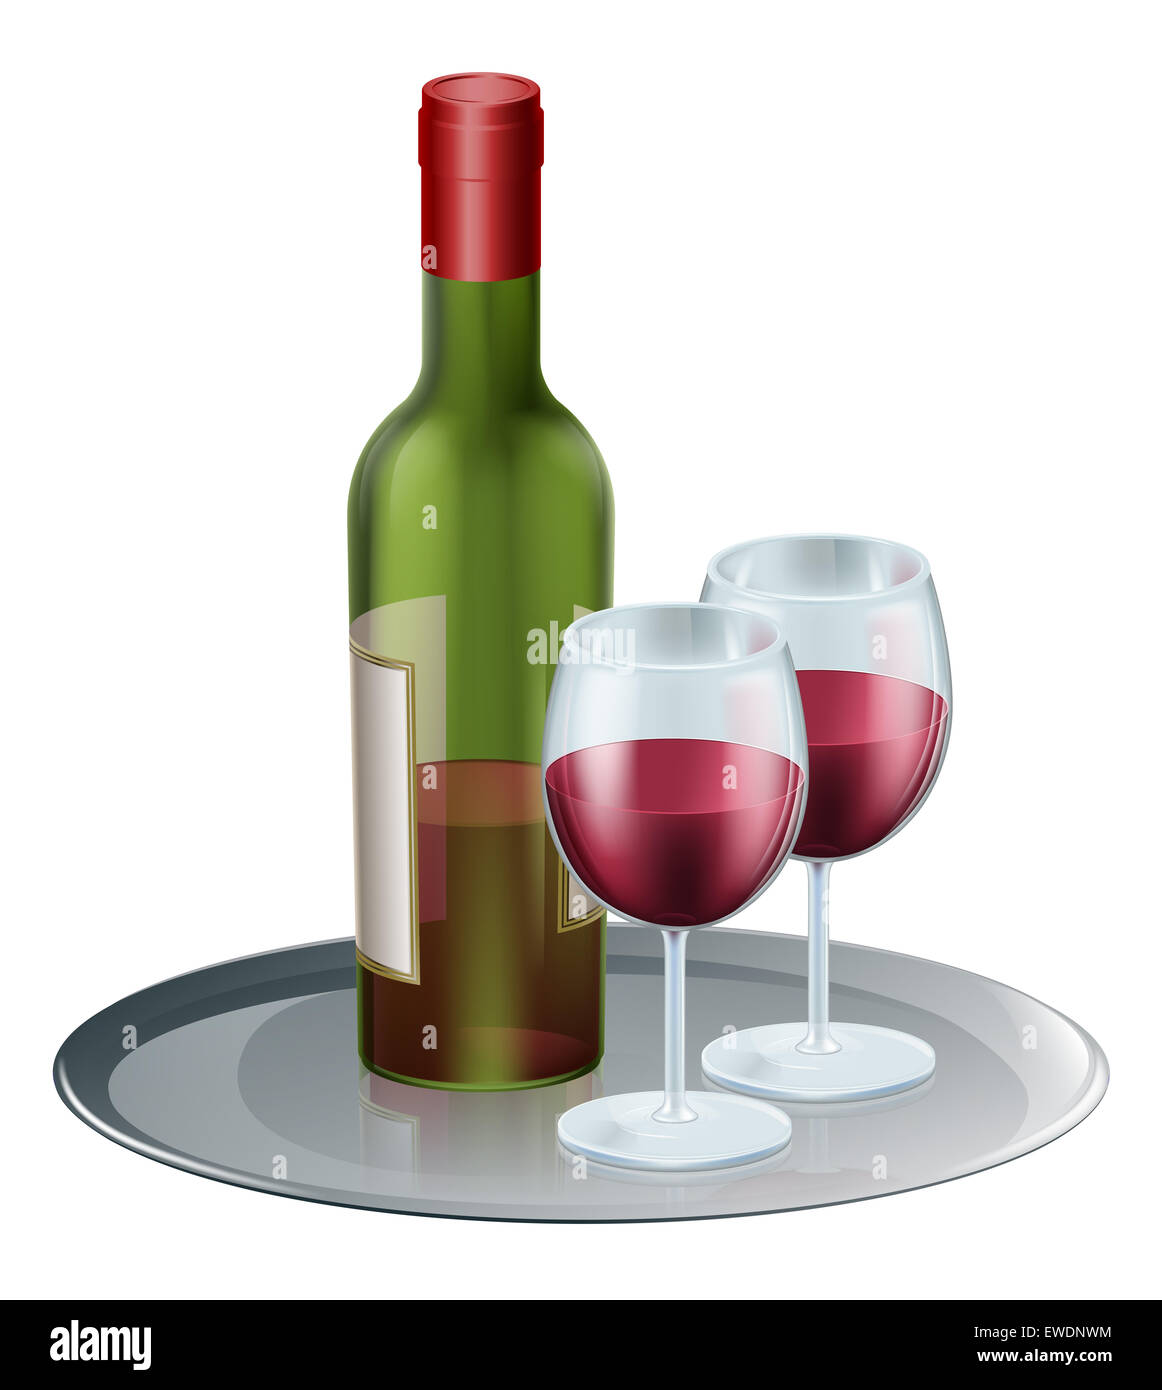 Red wine bottle and wine glasses on a silver tray or platter Stock Photo